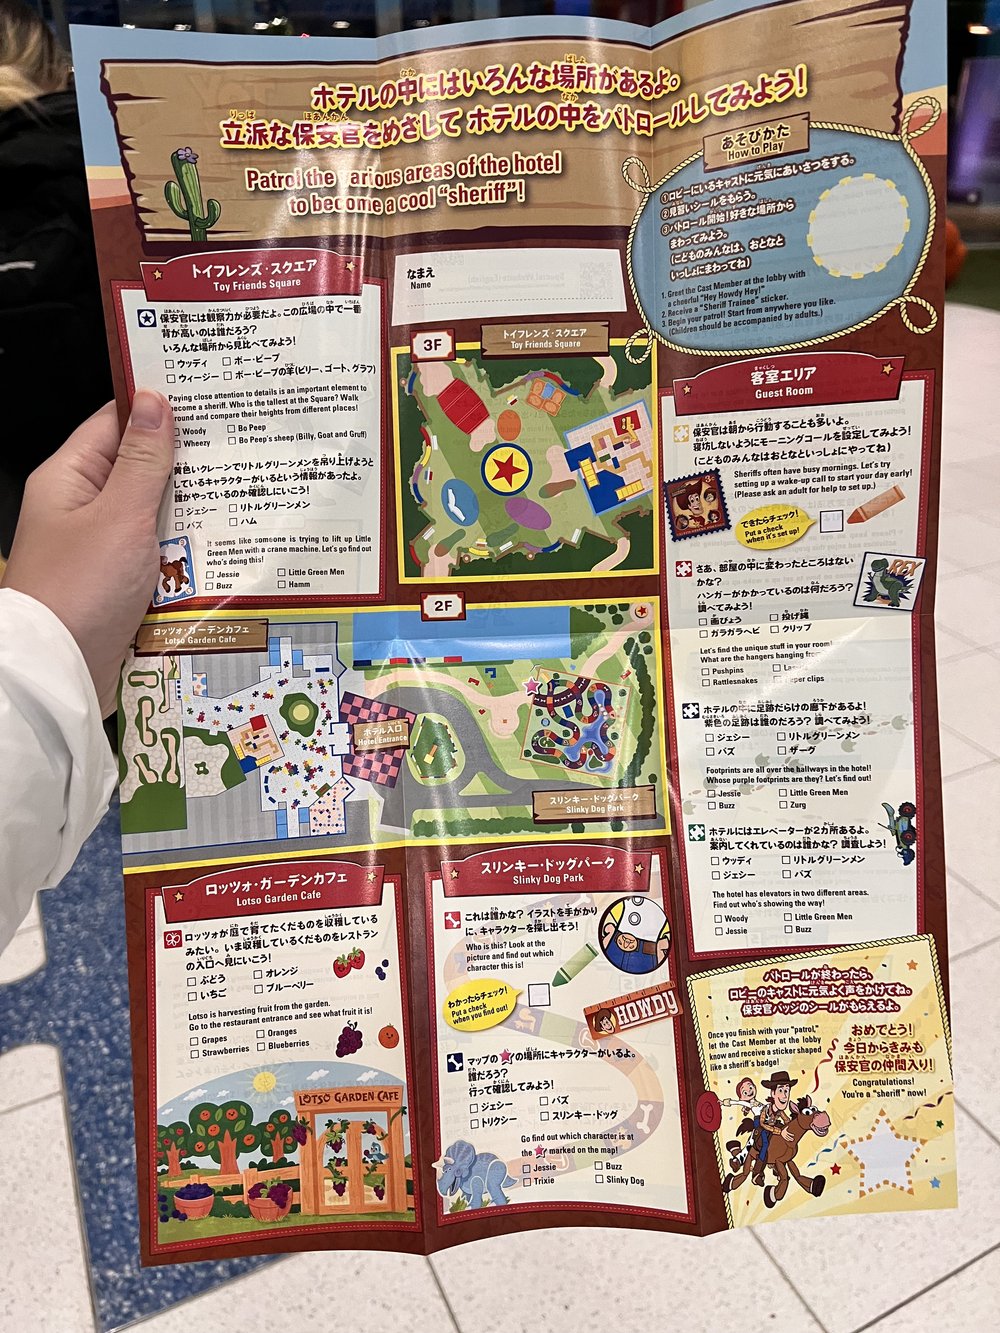  Opened Toy Story hotel guide with scavenger hunt tasks in different sections 